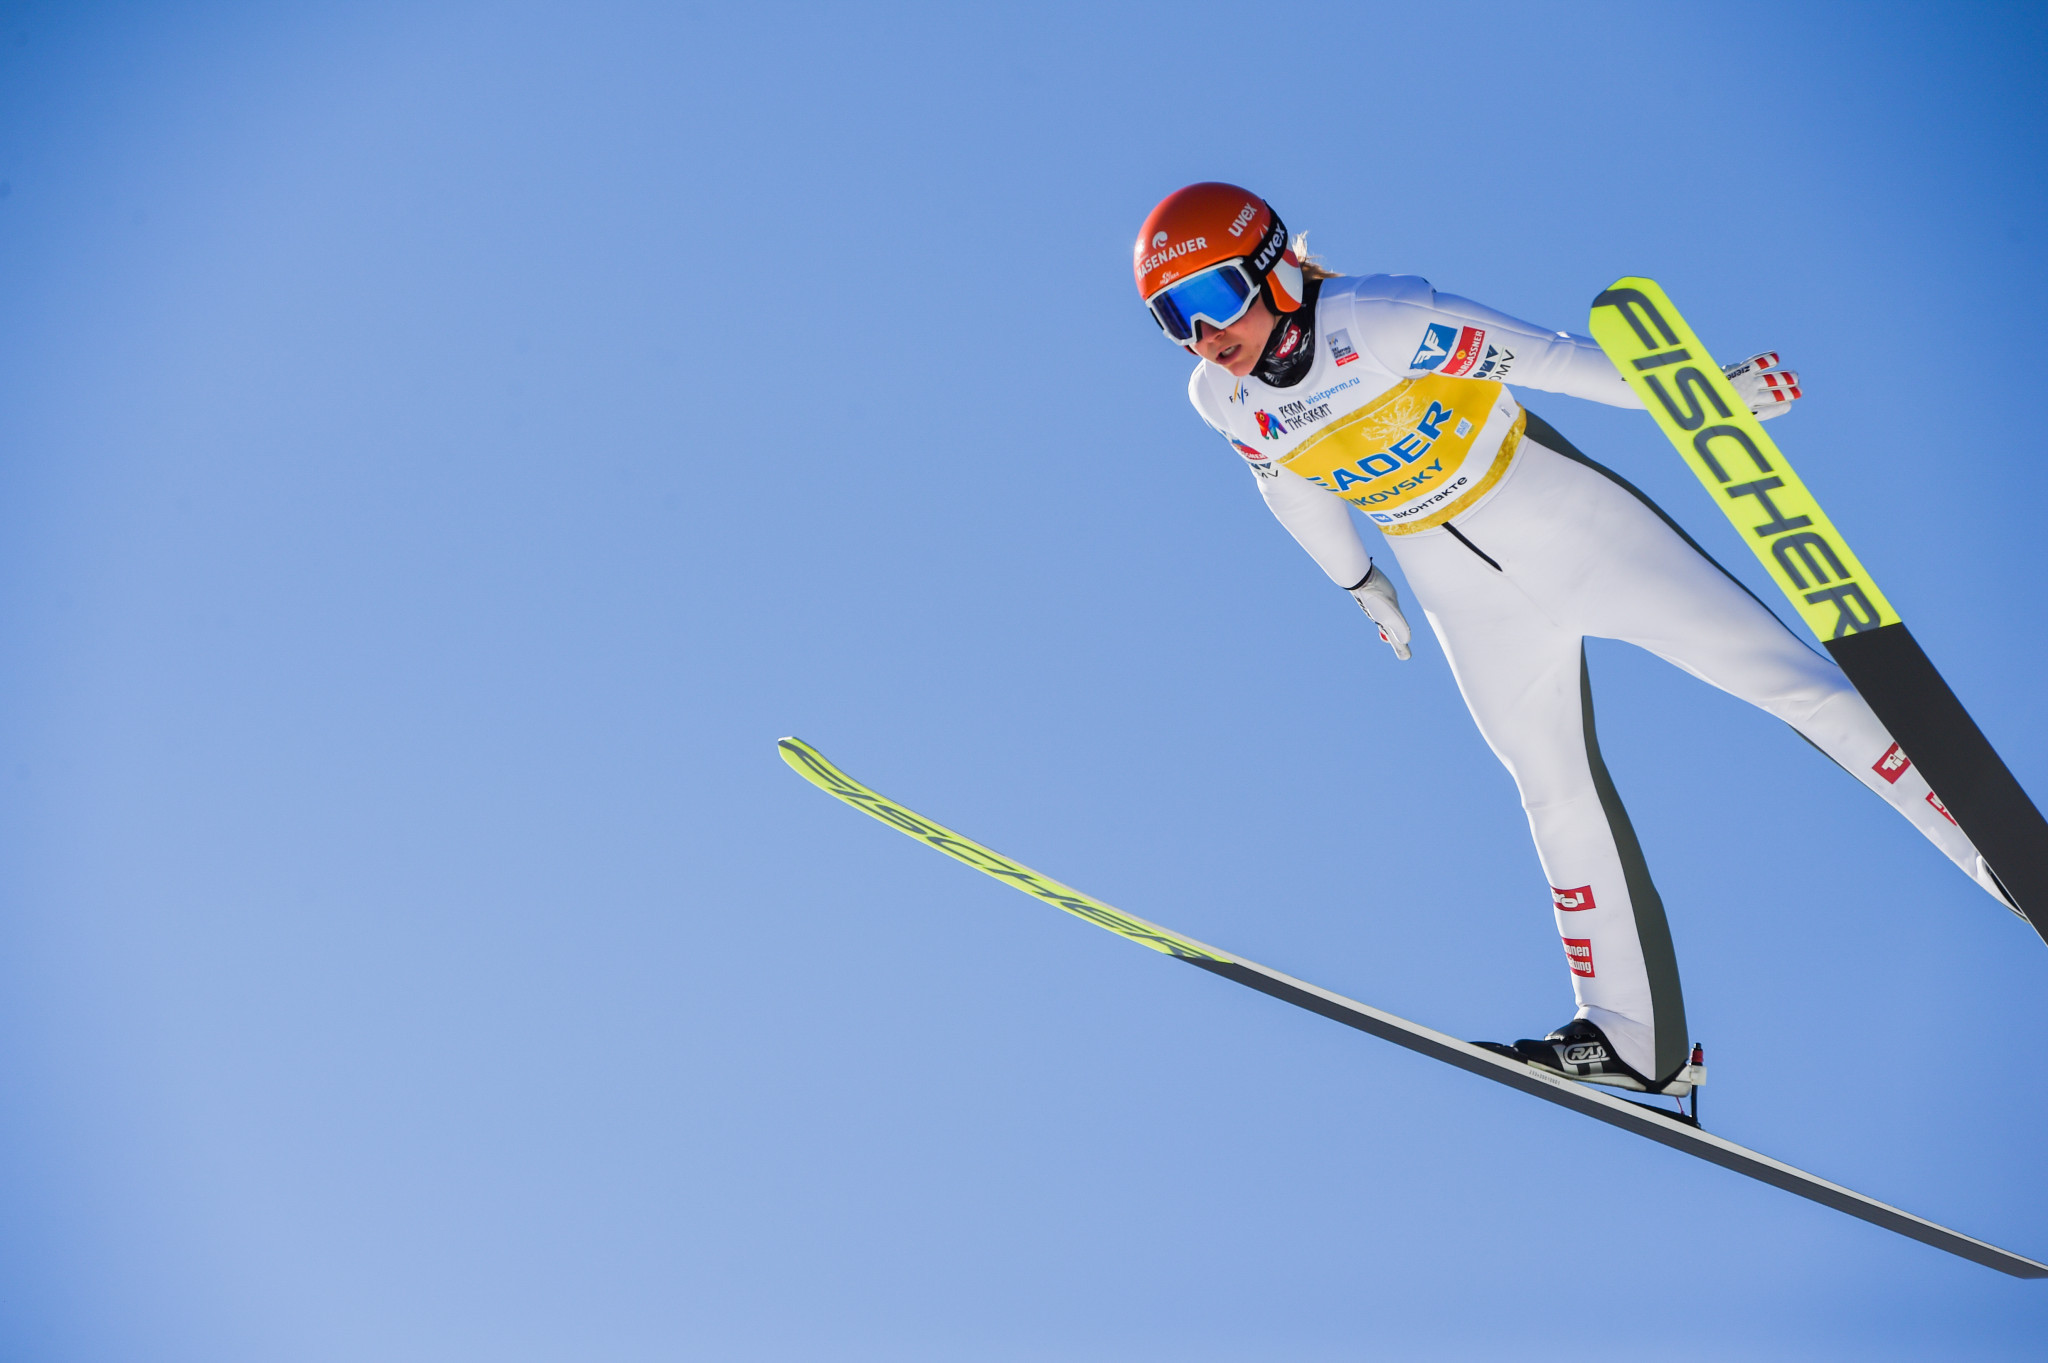 Kramer tops qualifying at first women’s Ski Jumping World Cup of new season